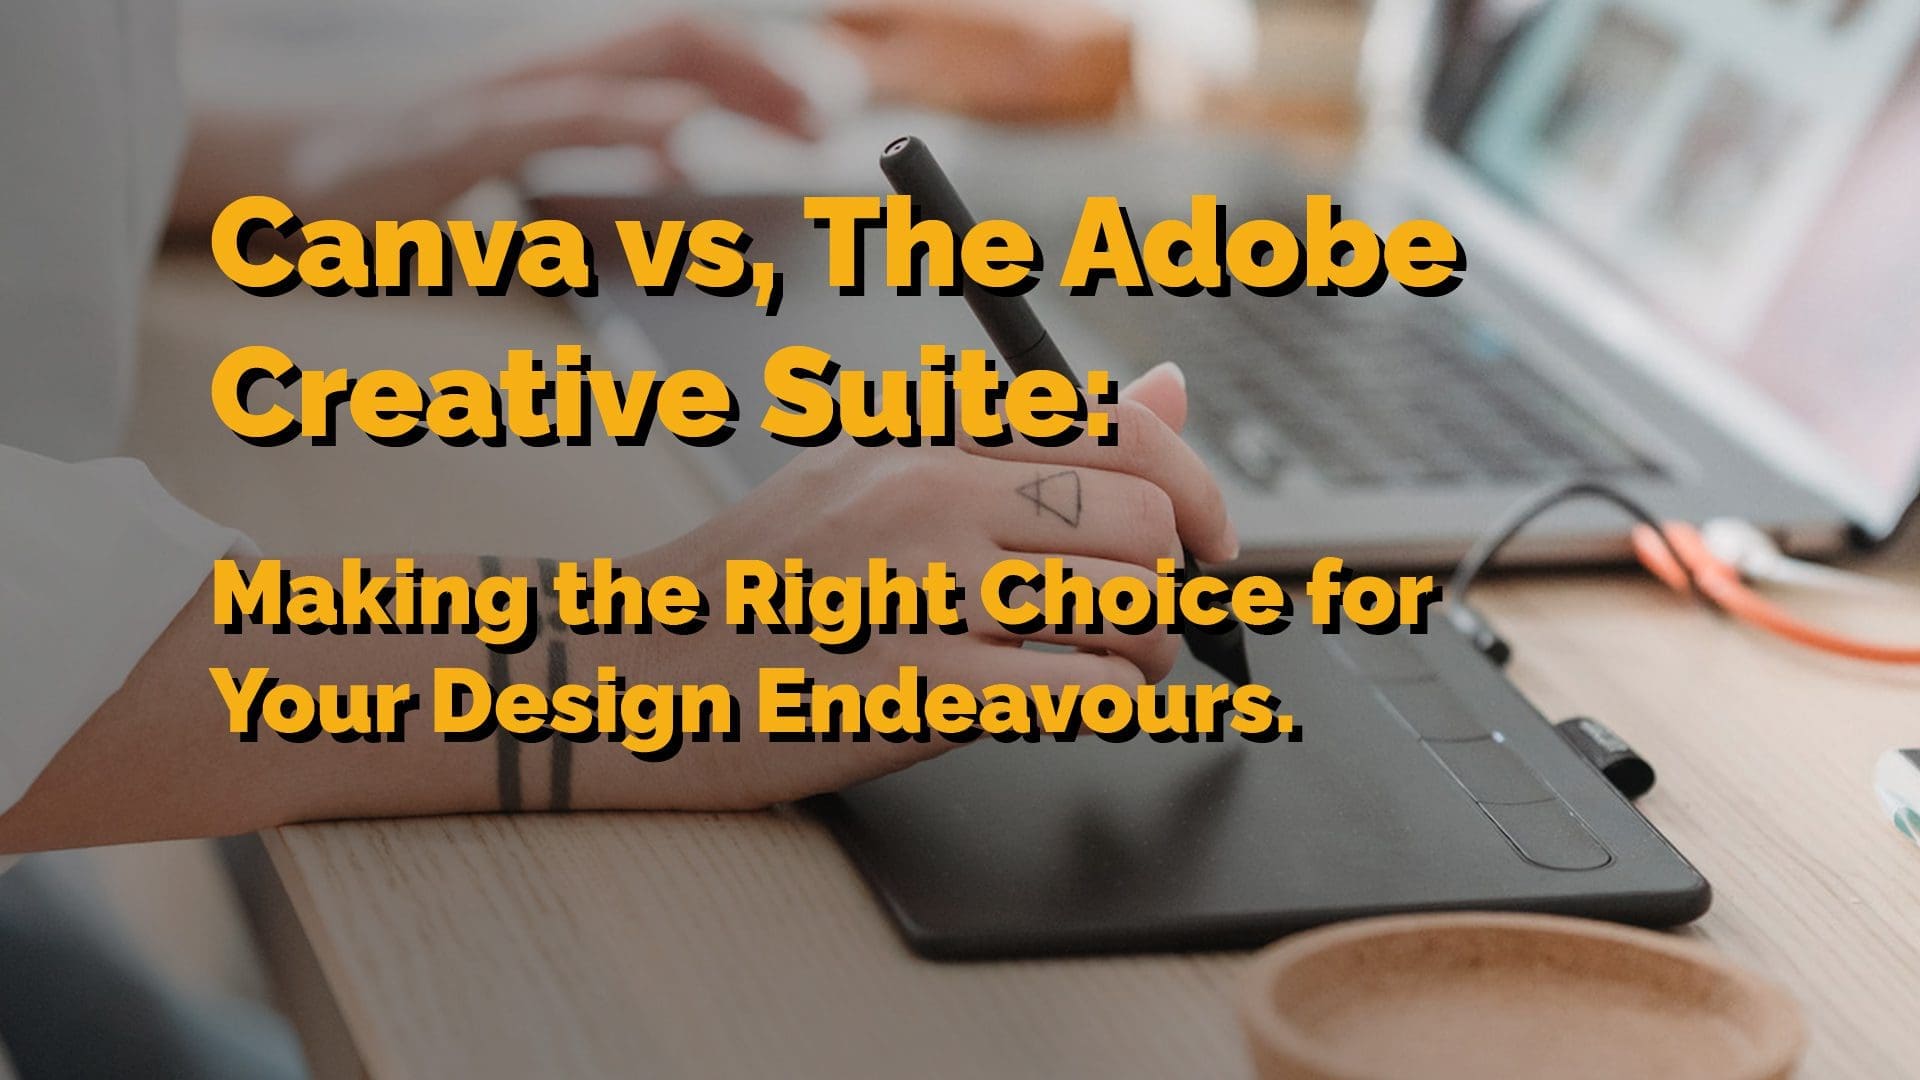 Canva vs. The Adobe Creative Cloud: Making the Right Choice for Your Design Endeavours